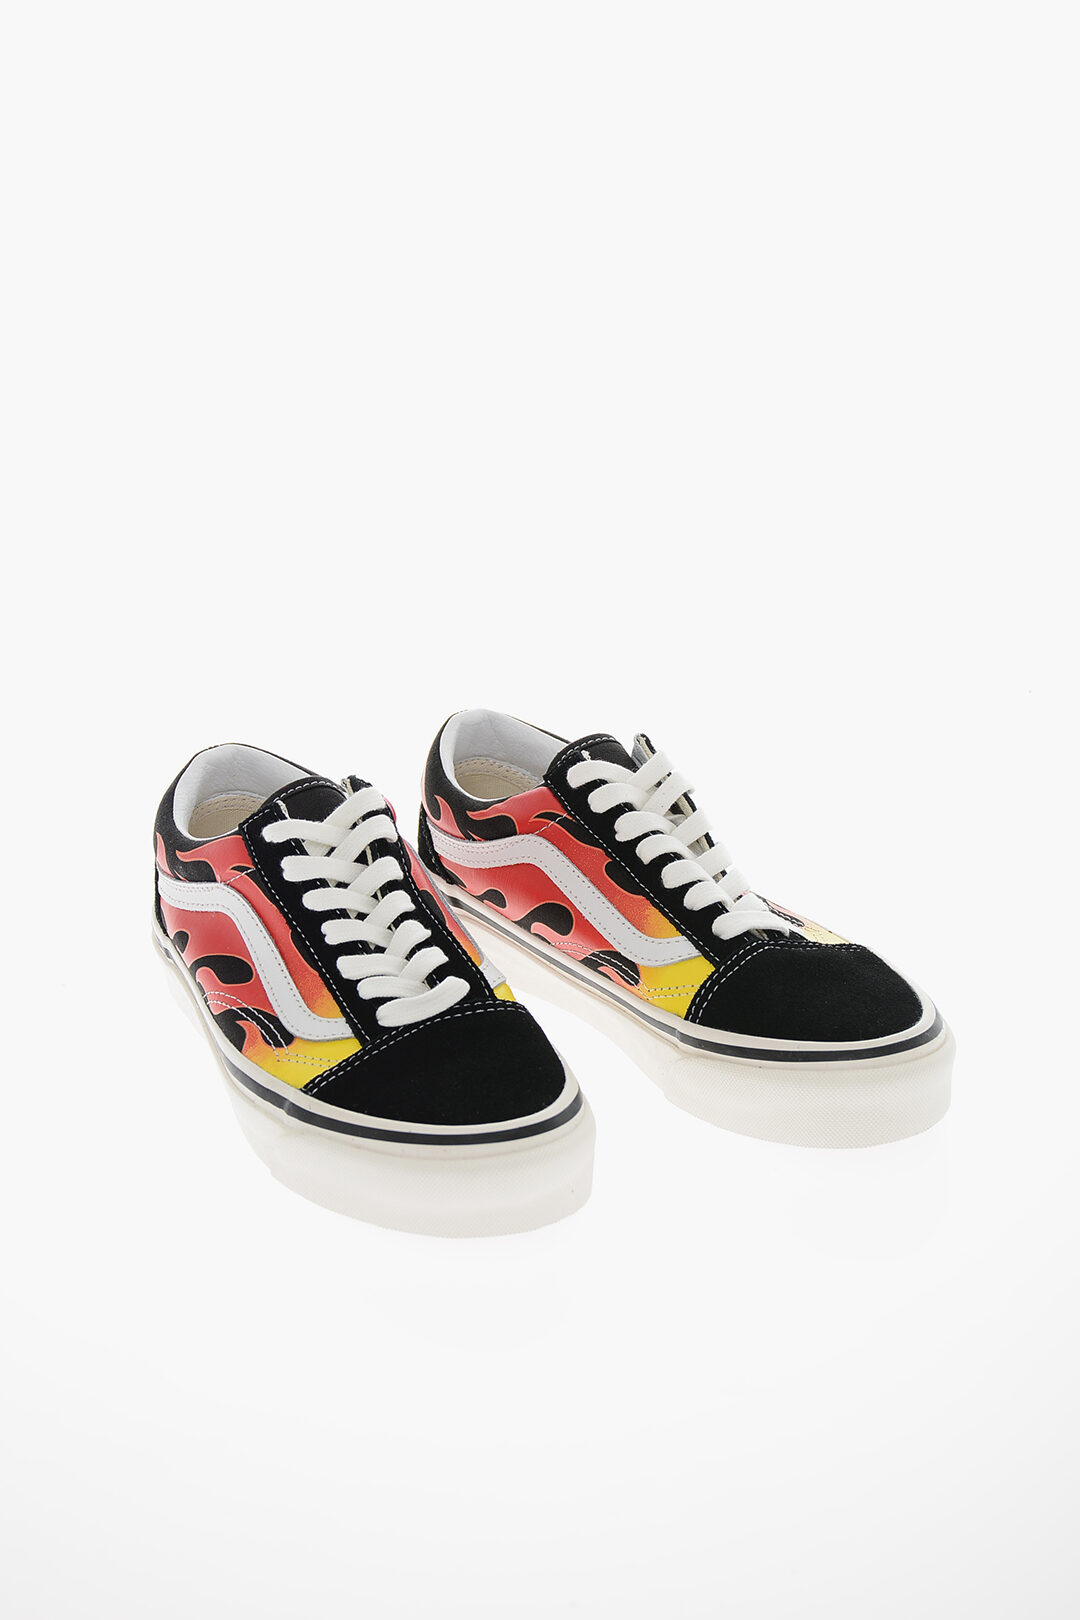 Vans ANAHEIM FACTORY Leather and Fabric OLD 36 Sneakers with Flames Print women - Glamood Outlet